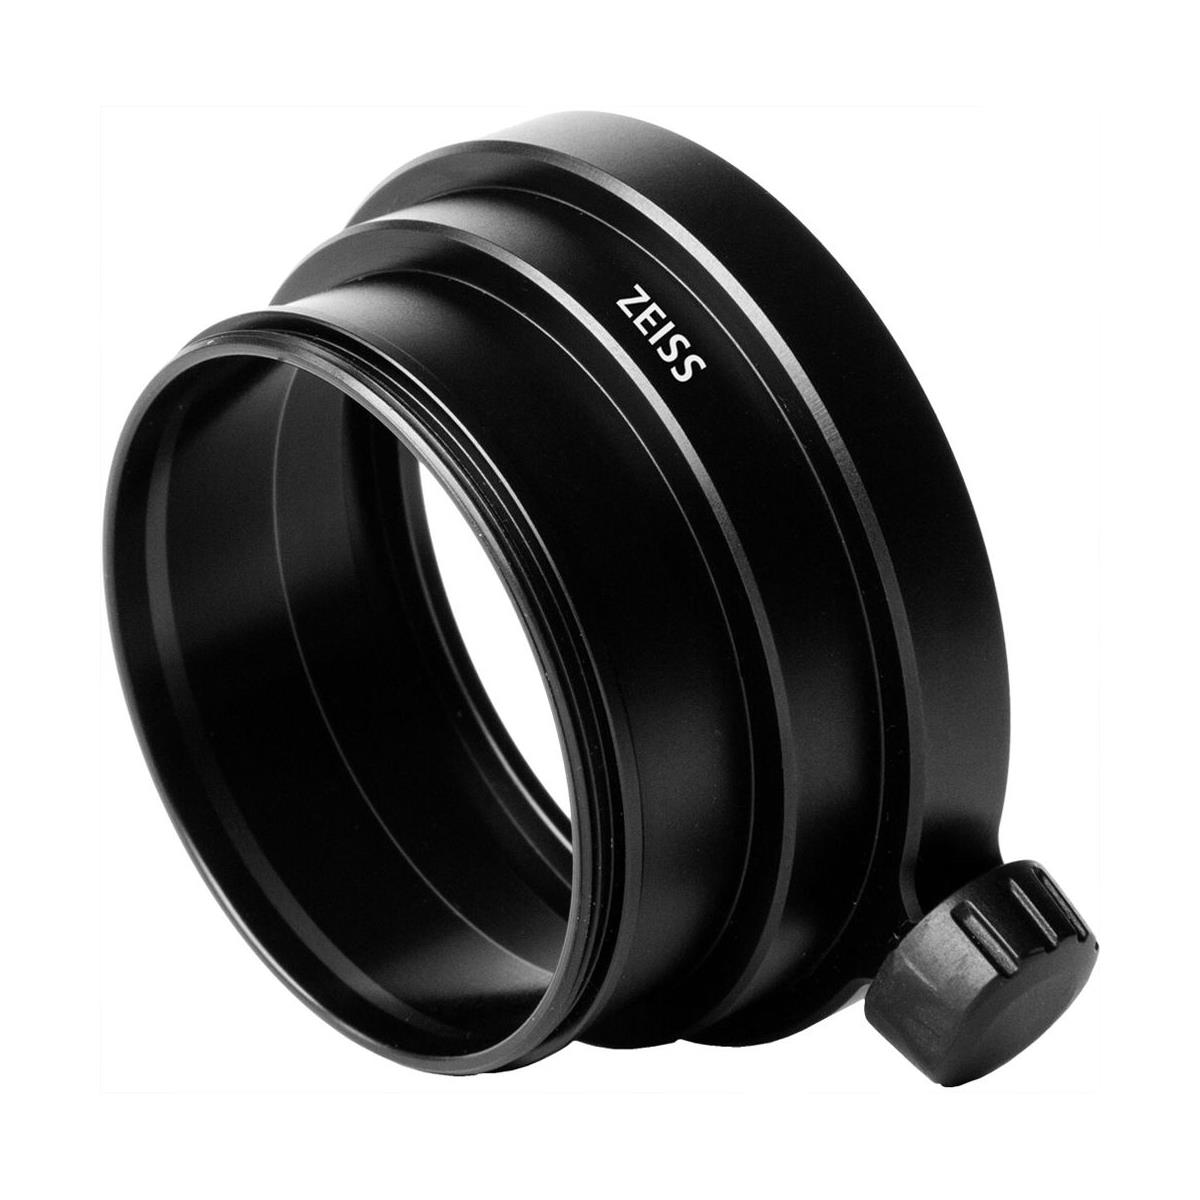 Image of Zeiss M49 Photo Lens Adaptor for Victory Harpia Spotting Scope